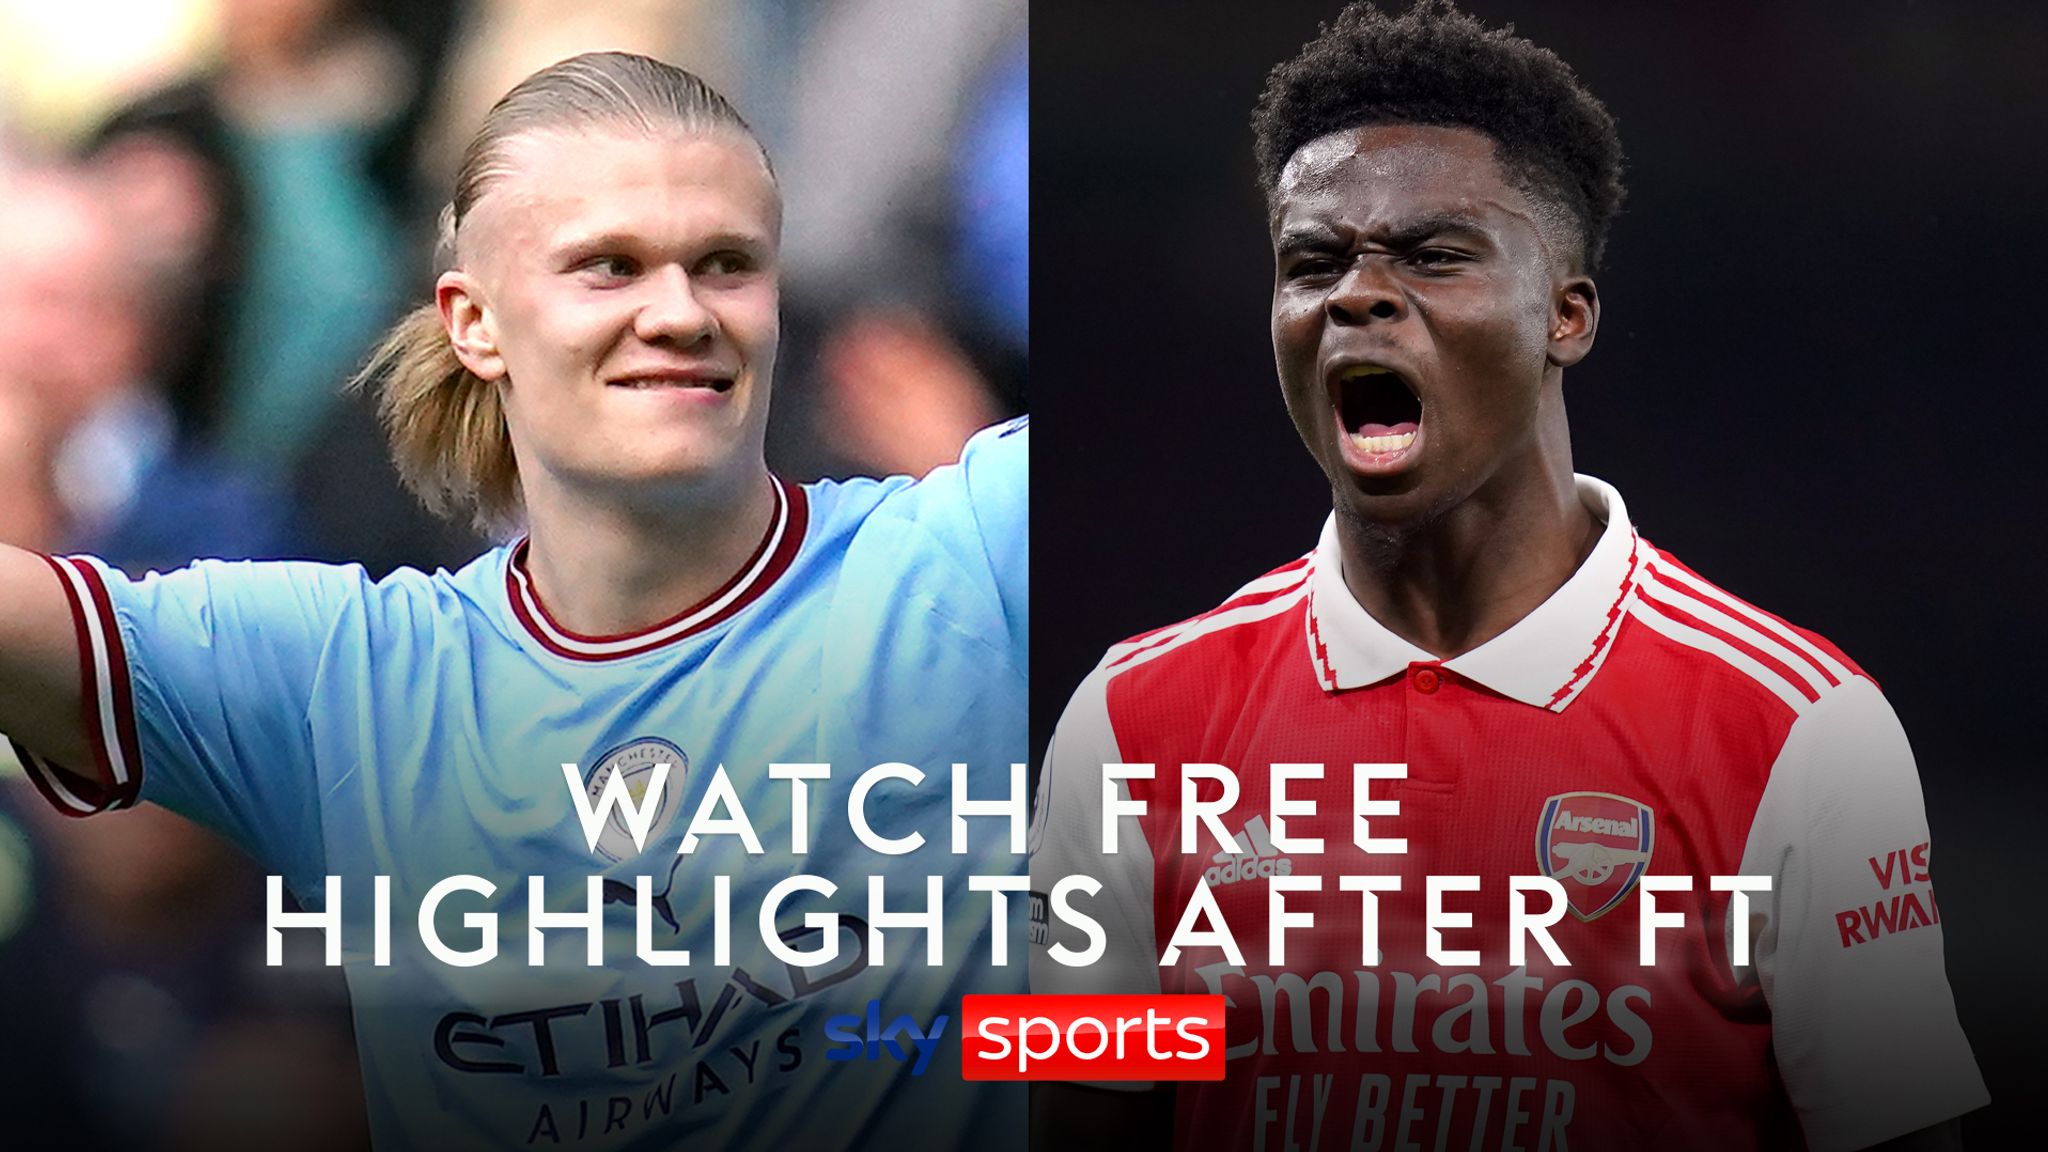 How to watch Man City Vs Arsenal: Man City vs Arsenal live streaming,  channel, kick off time of Premier League match - The Economic Times